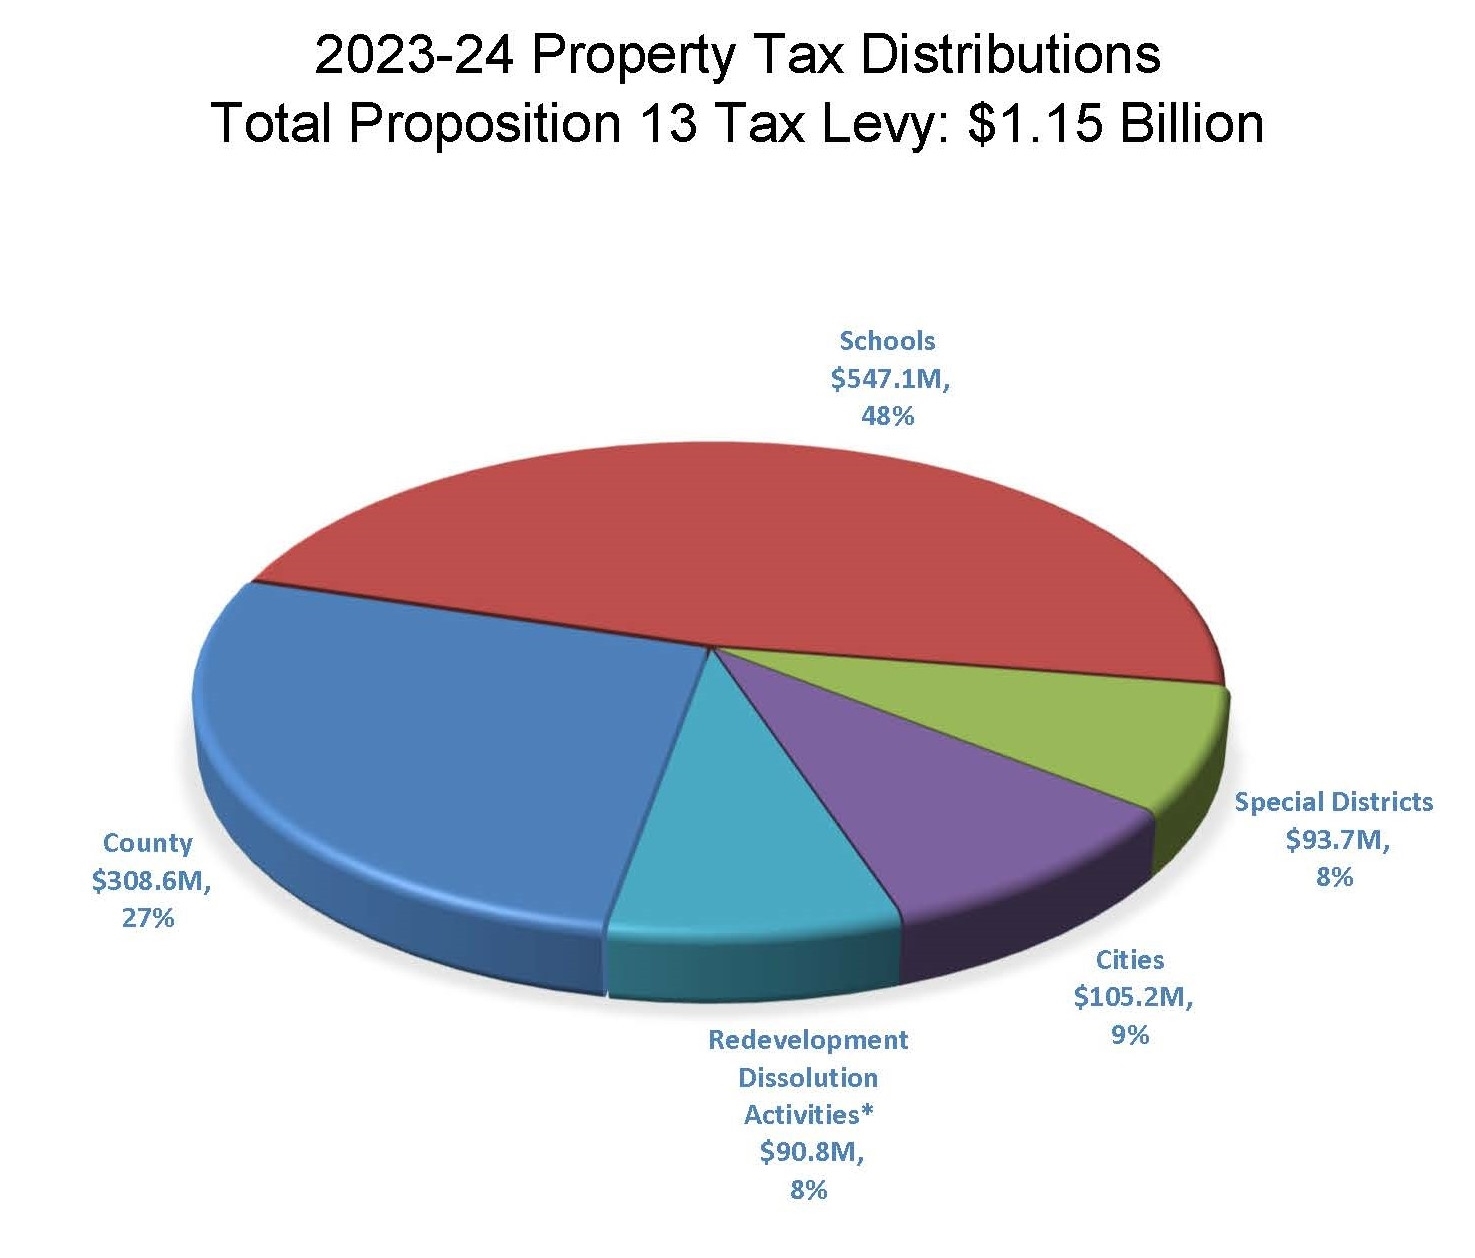 2023-24 Property tax distributions pie chart; total proposition 13 tax levy $1.15 Billion; Schools: $547.1 M, 48% Special Districts: $93.7M, 8% Cities: $105.2M, 9% Redevelopment Activities*: $90.8M, 8% County: $308.6M, 27%